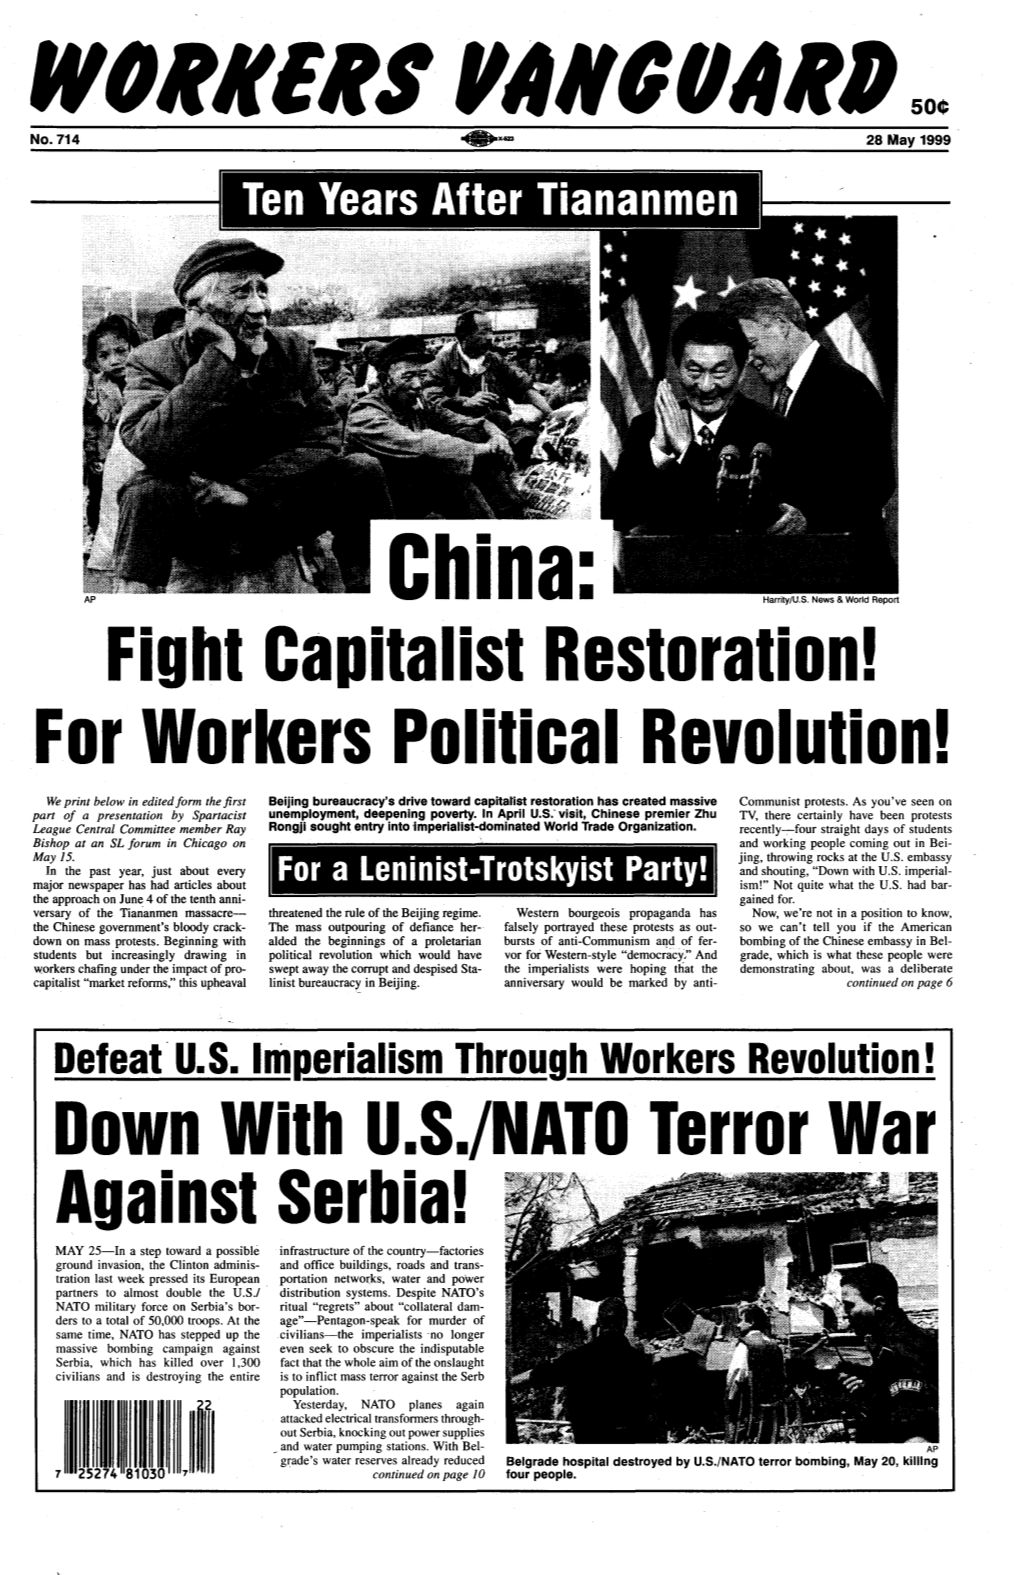 Fight Capitalist Restoration! for Workers Political Revolution!